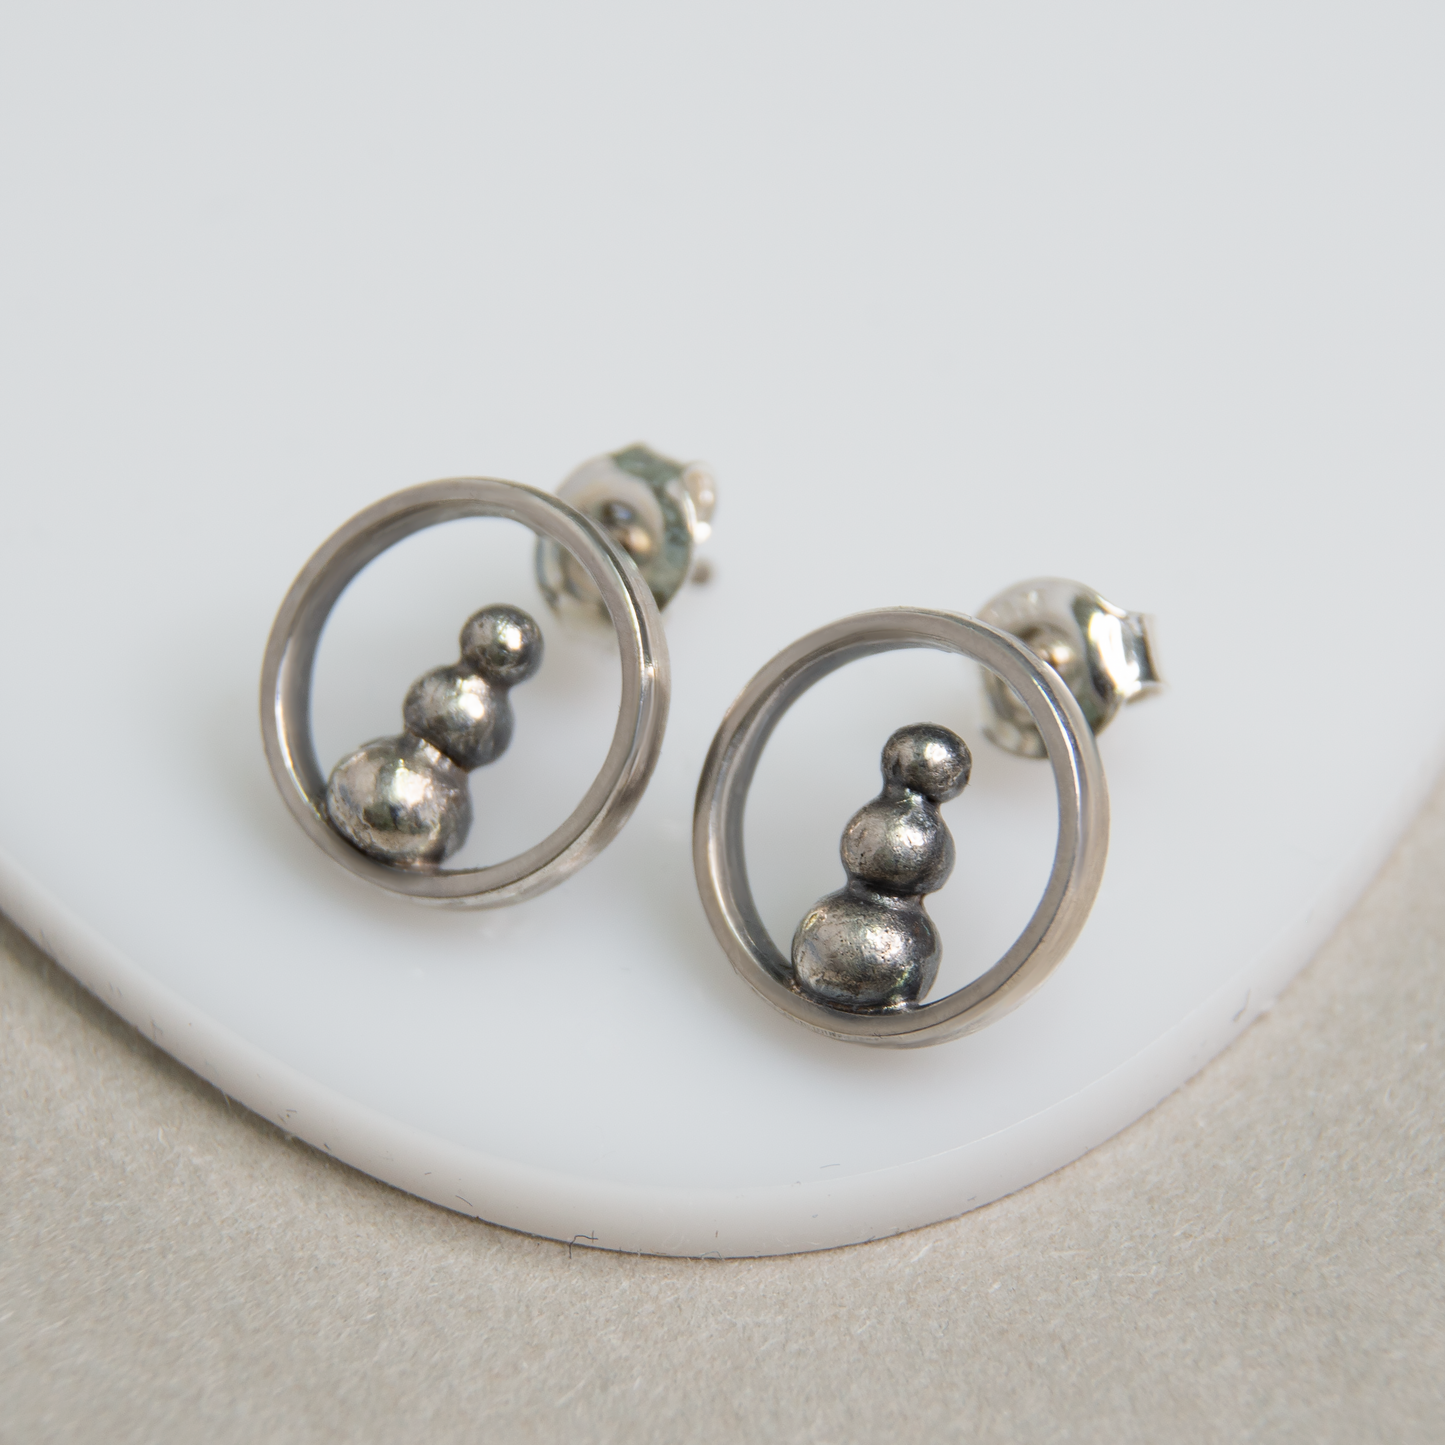 Round Frame Earrings With Silver Beads